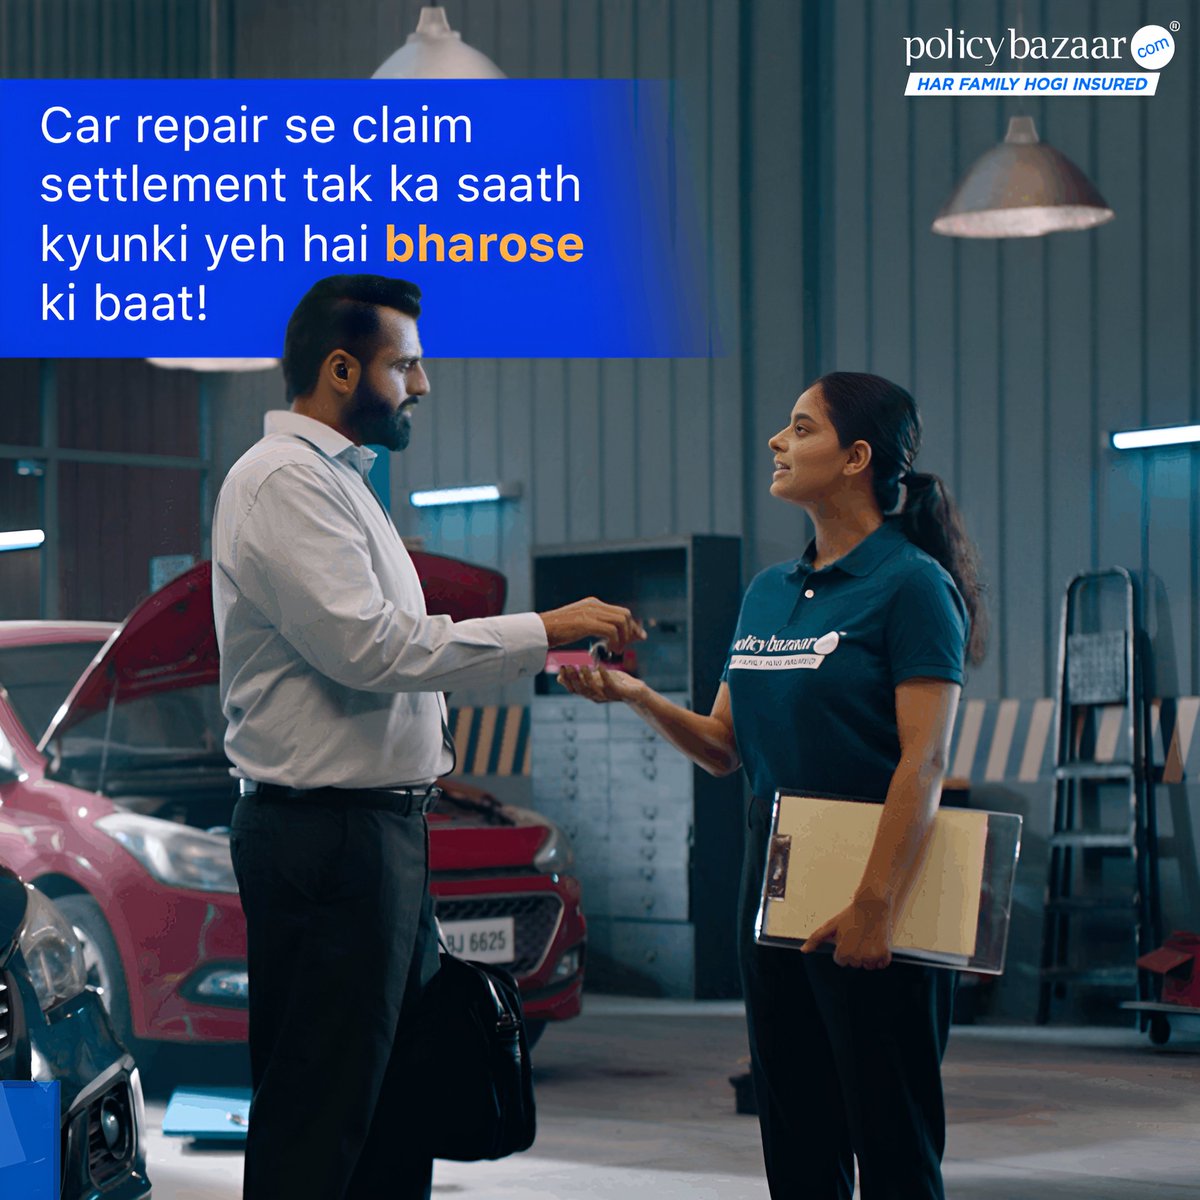 Our experts are there for you at every step, from car repairs to claim settlements. Compare car insurance and save up to ₹8,000*! #Policybazaar #Insurance #CarInsurance #CarRepair